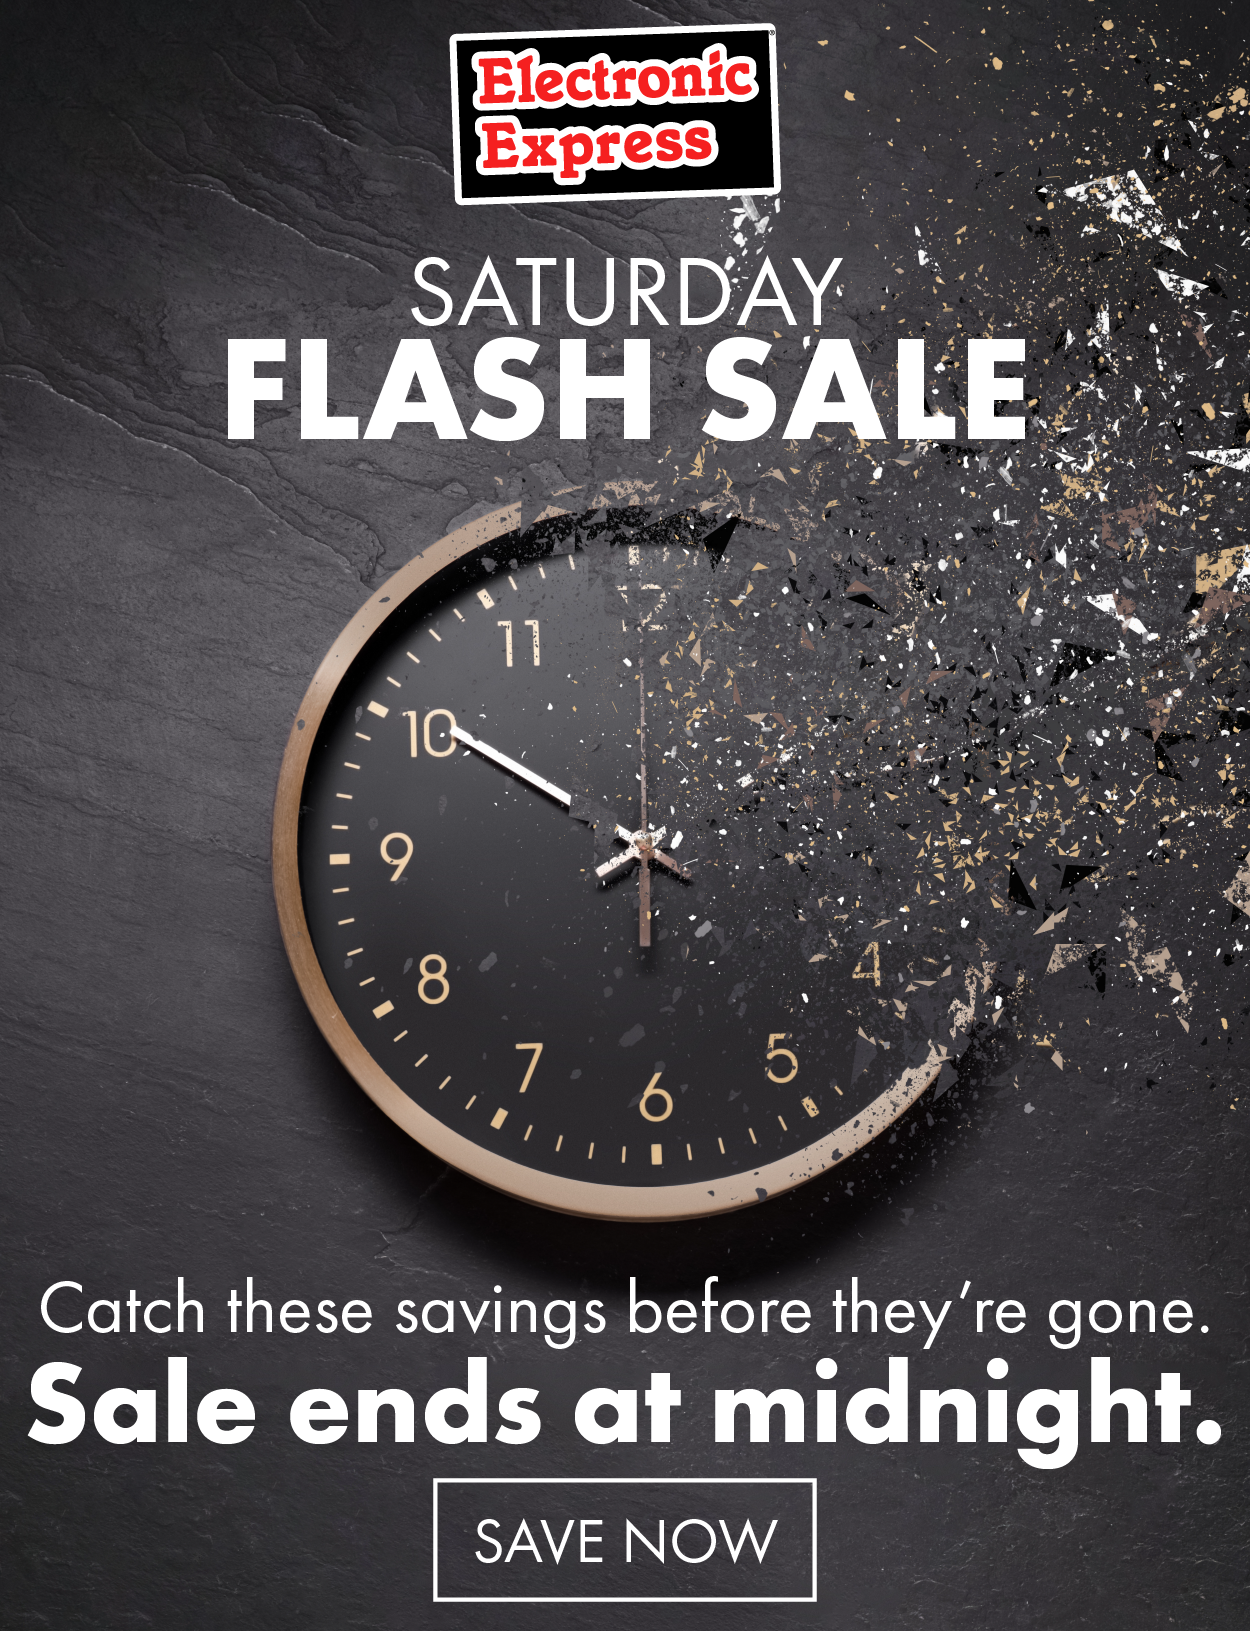 Saturday Flash Sale! Catch these savings before they're gone. Sale ends at midnight